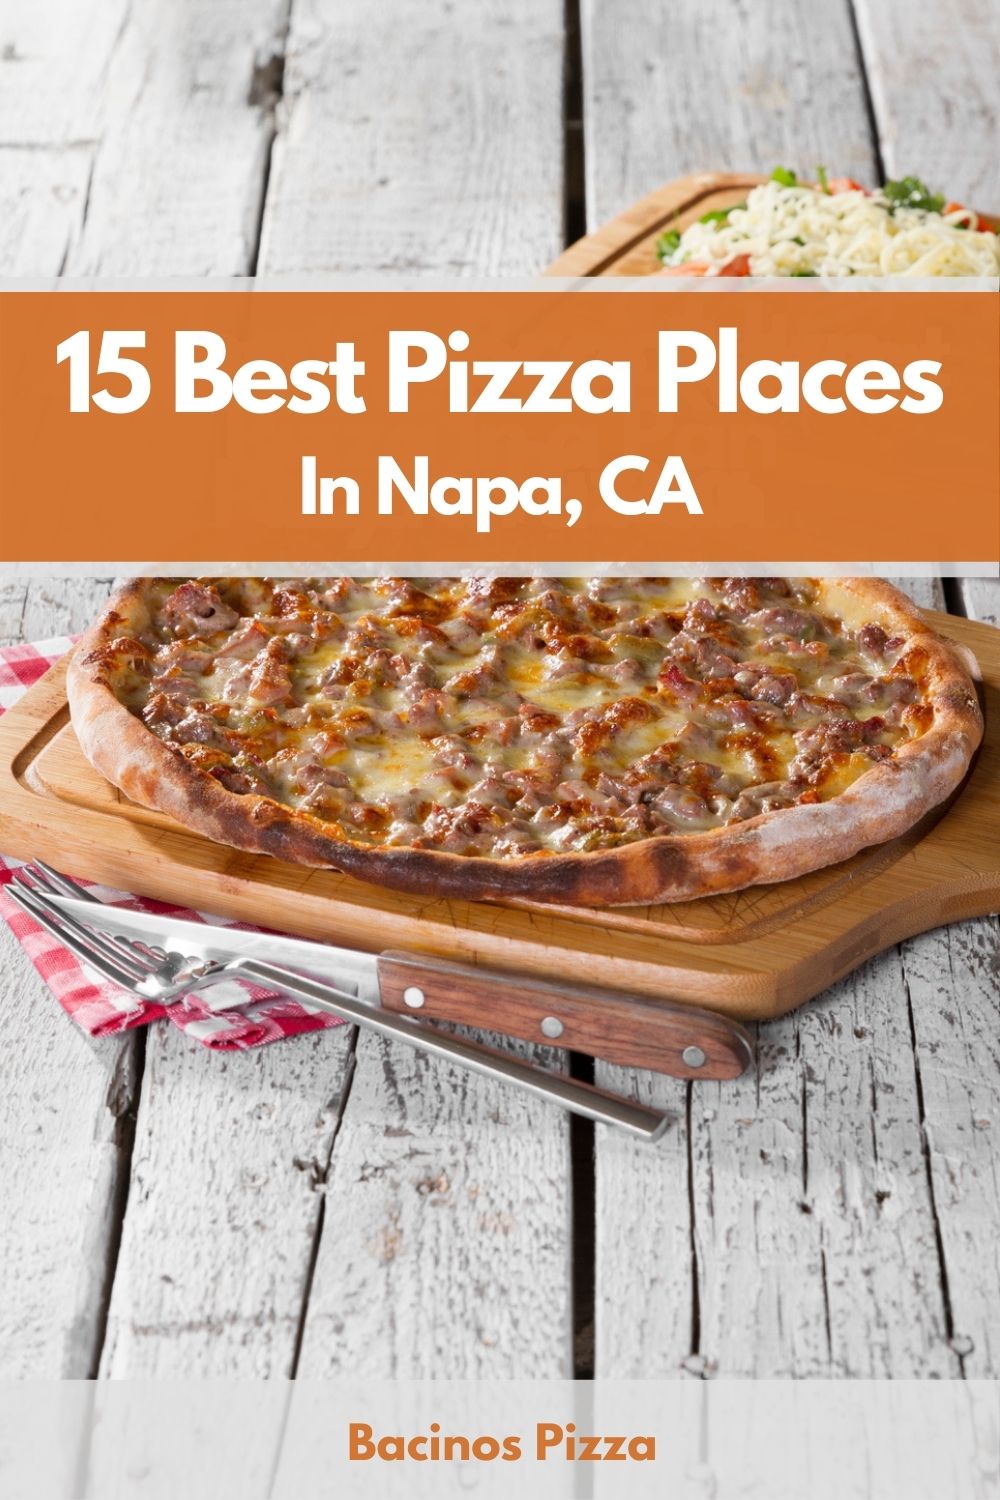 15 Best Pizza Places In Napa, CA pin